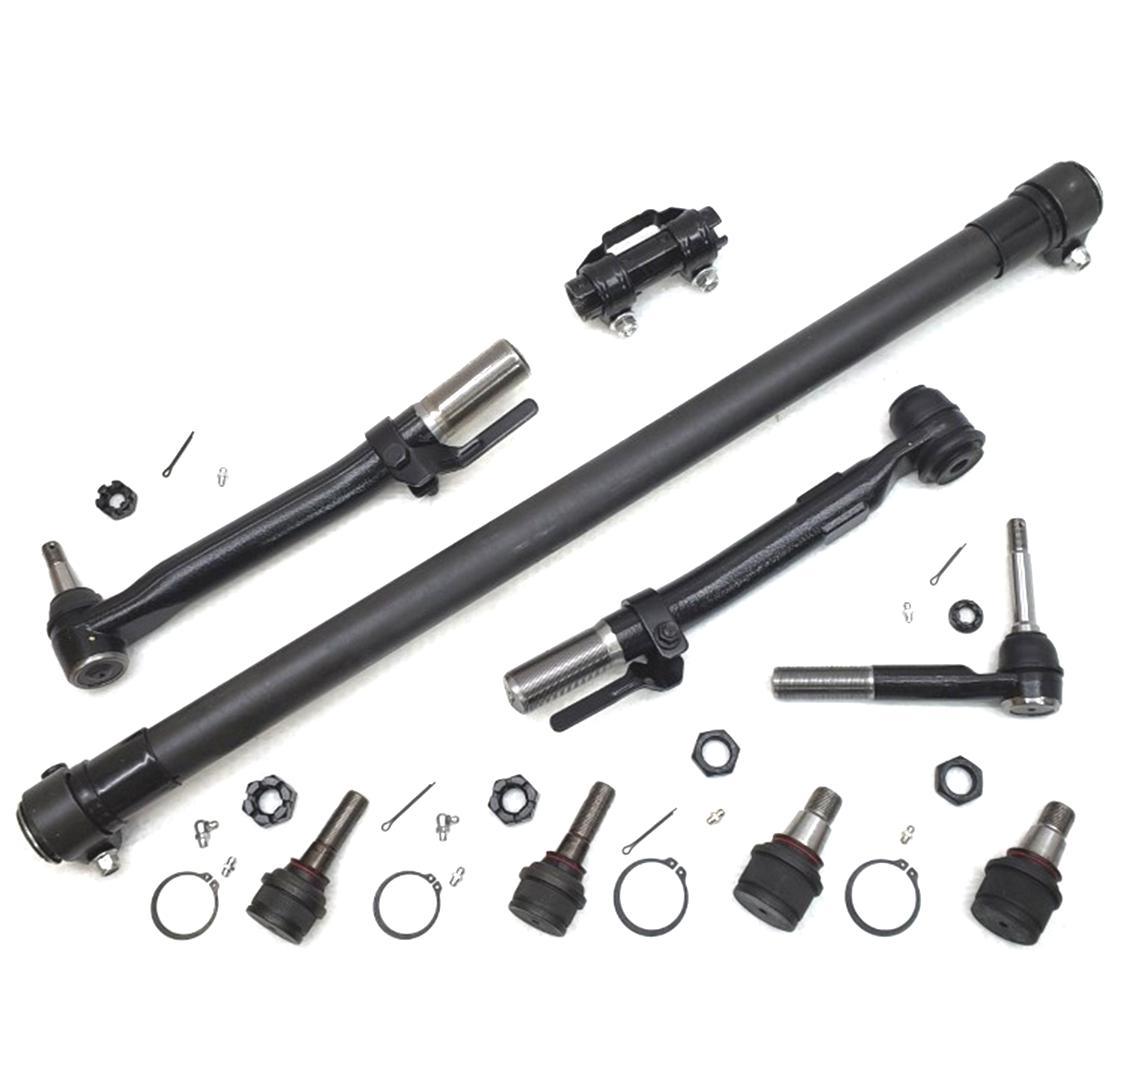 Lifetime Auto Parts Ball Joint & Tie Rod Steering Kit for 2017-2019 Ford F250 & F350 Super Duty 4x4 Wide Frame